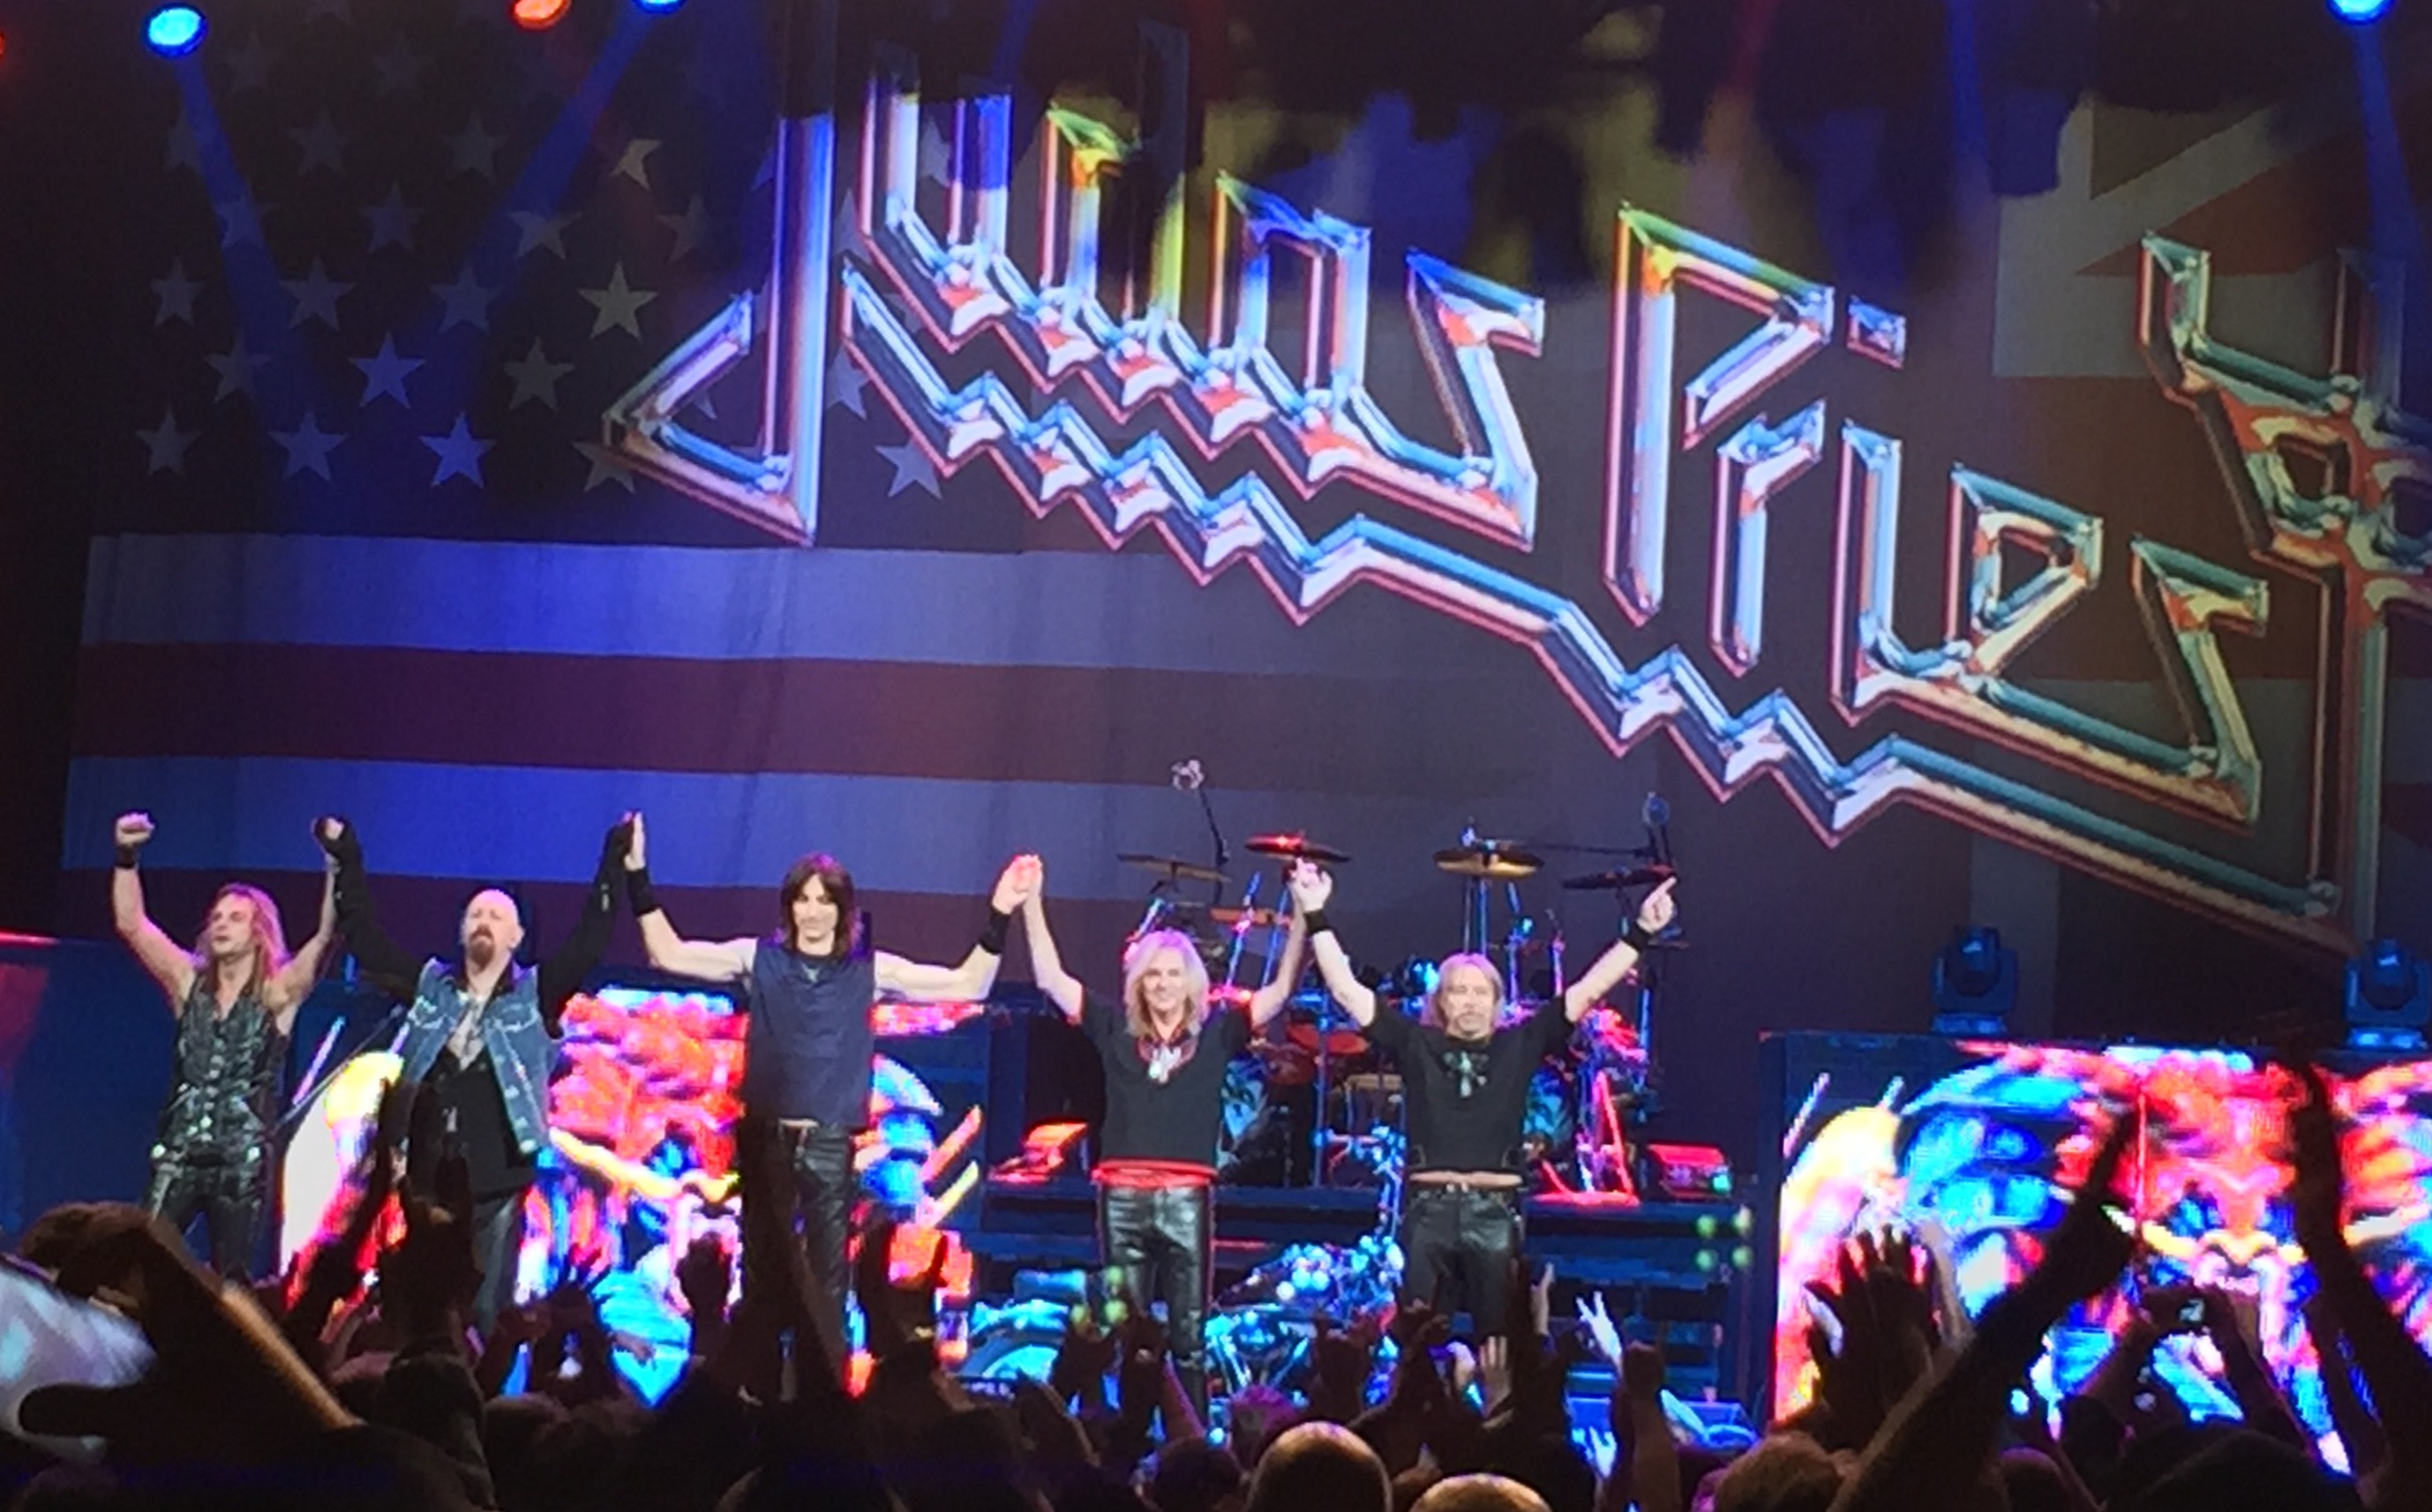 2756x1714 File:Judas Priest - Redeemer of Souls - 9th Oct 2014 - Barclay Center,